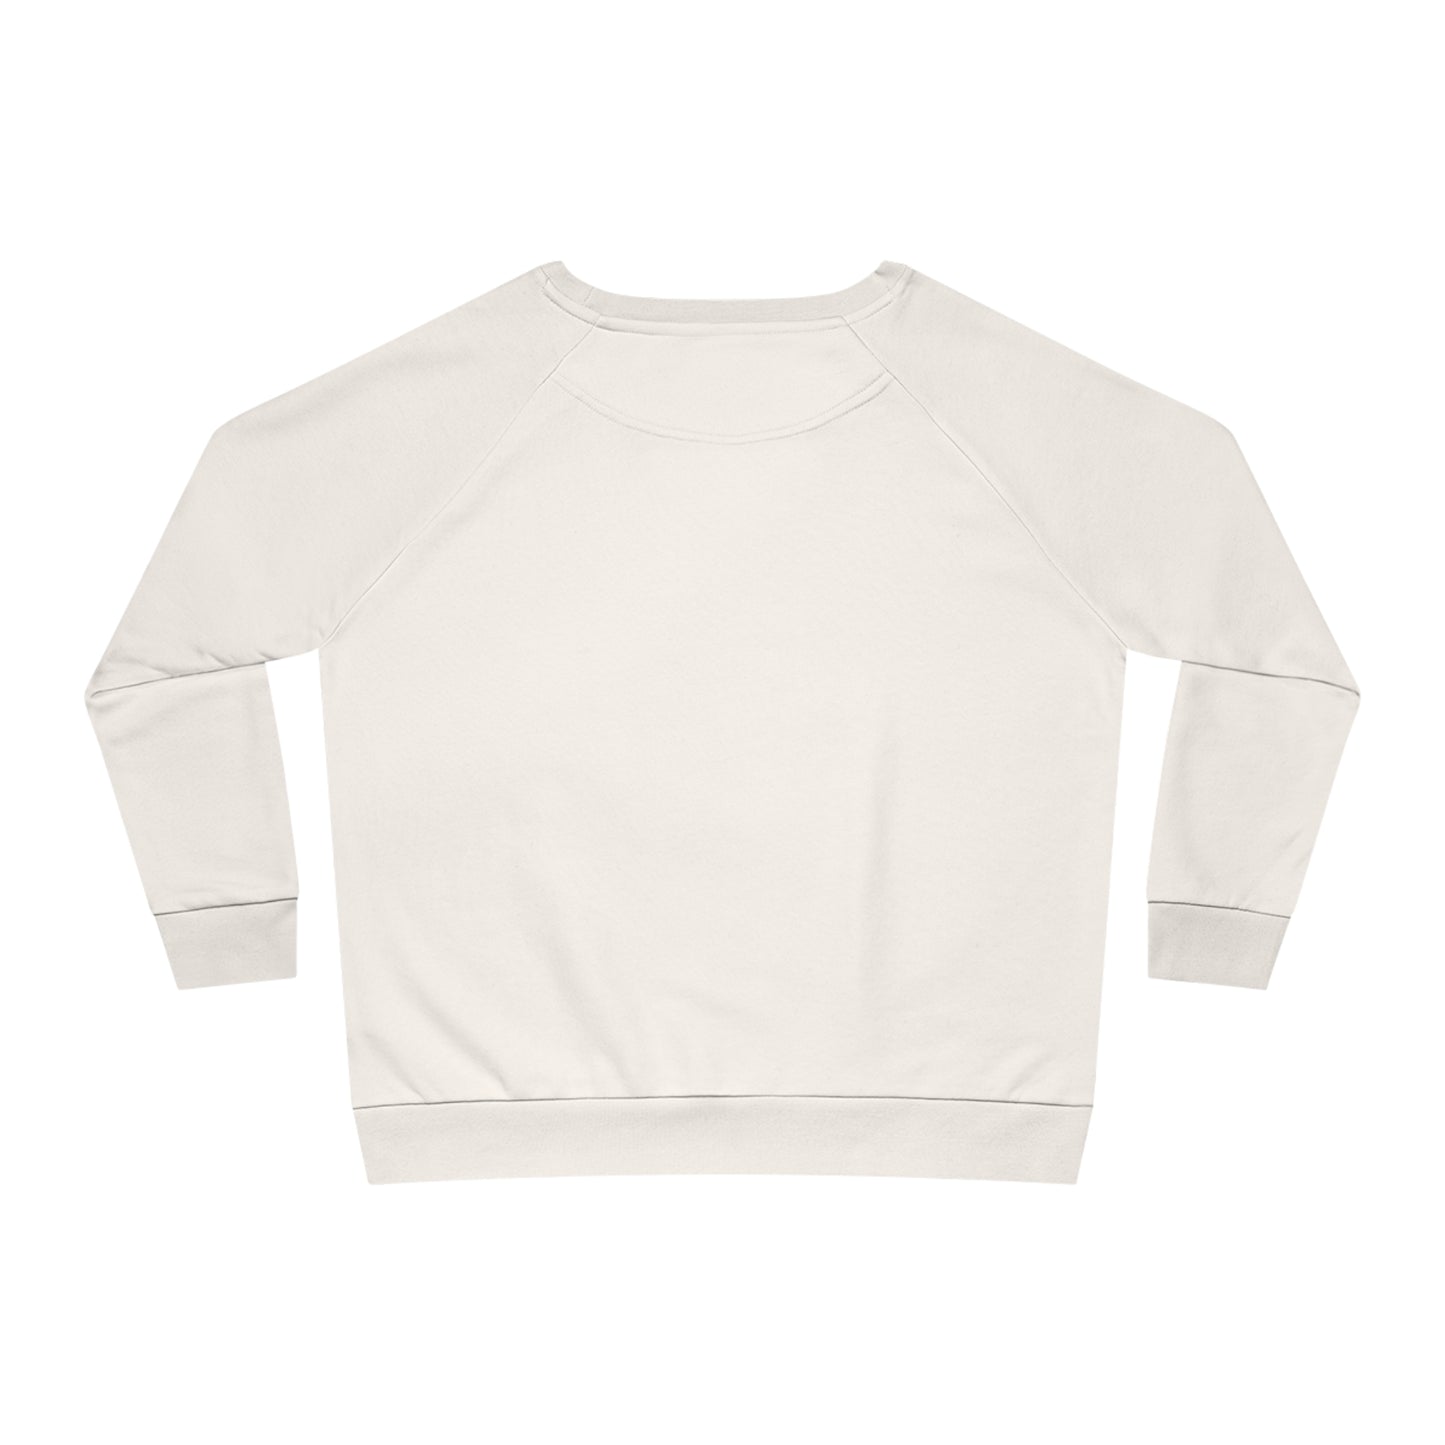 Eco-Friendly Organic - Women's Dazzler Relaxed Fit Sweatshirt - International Day of Forests graphic